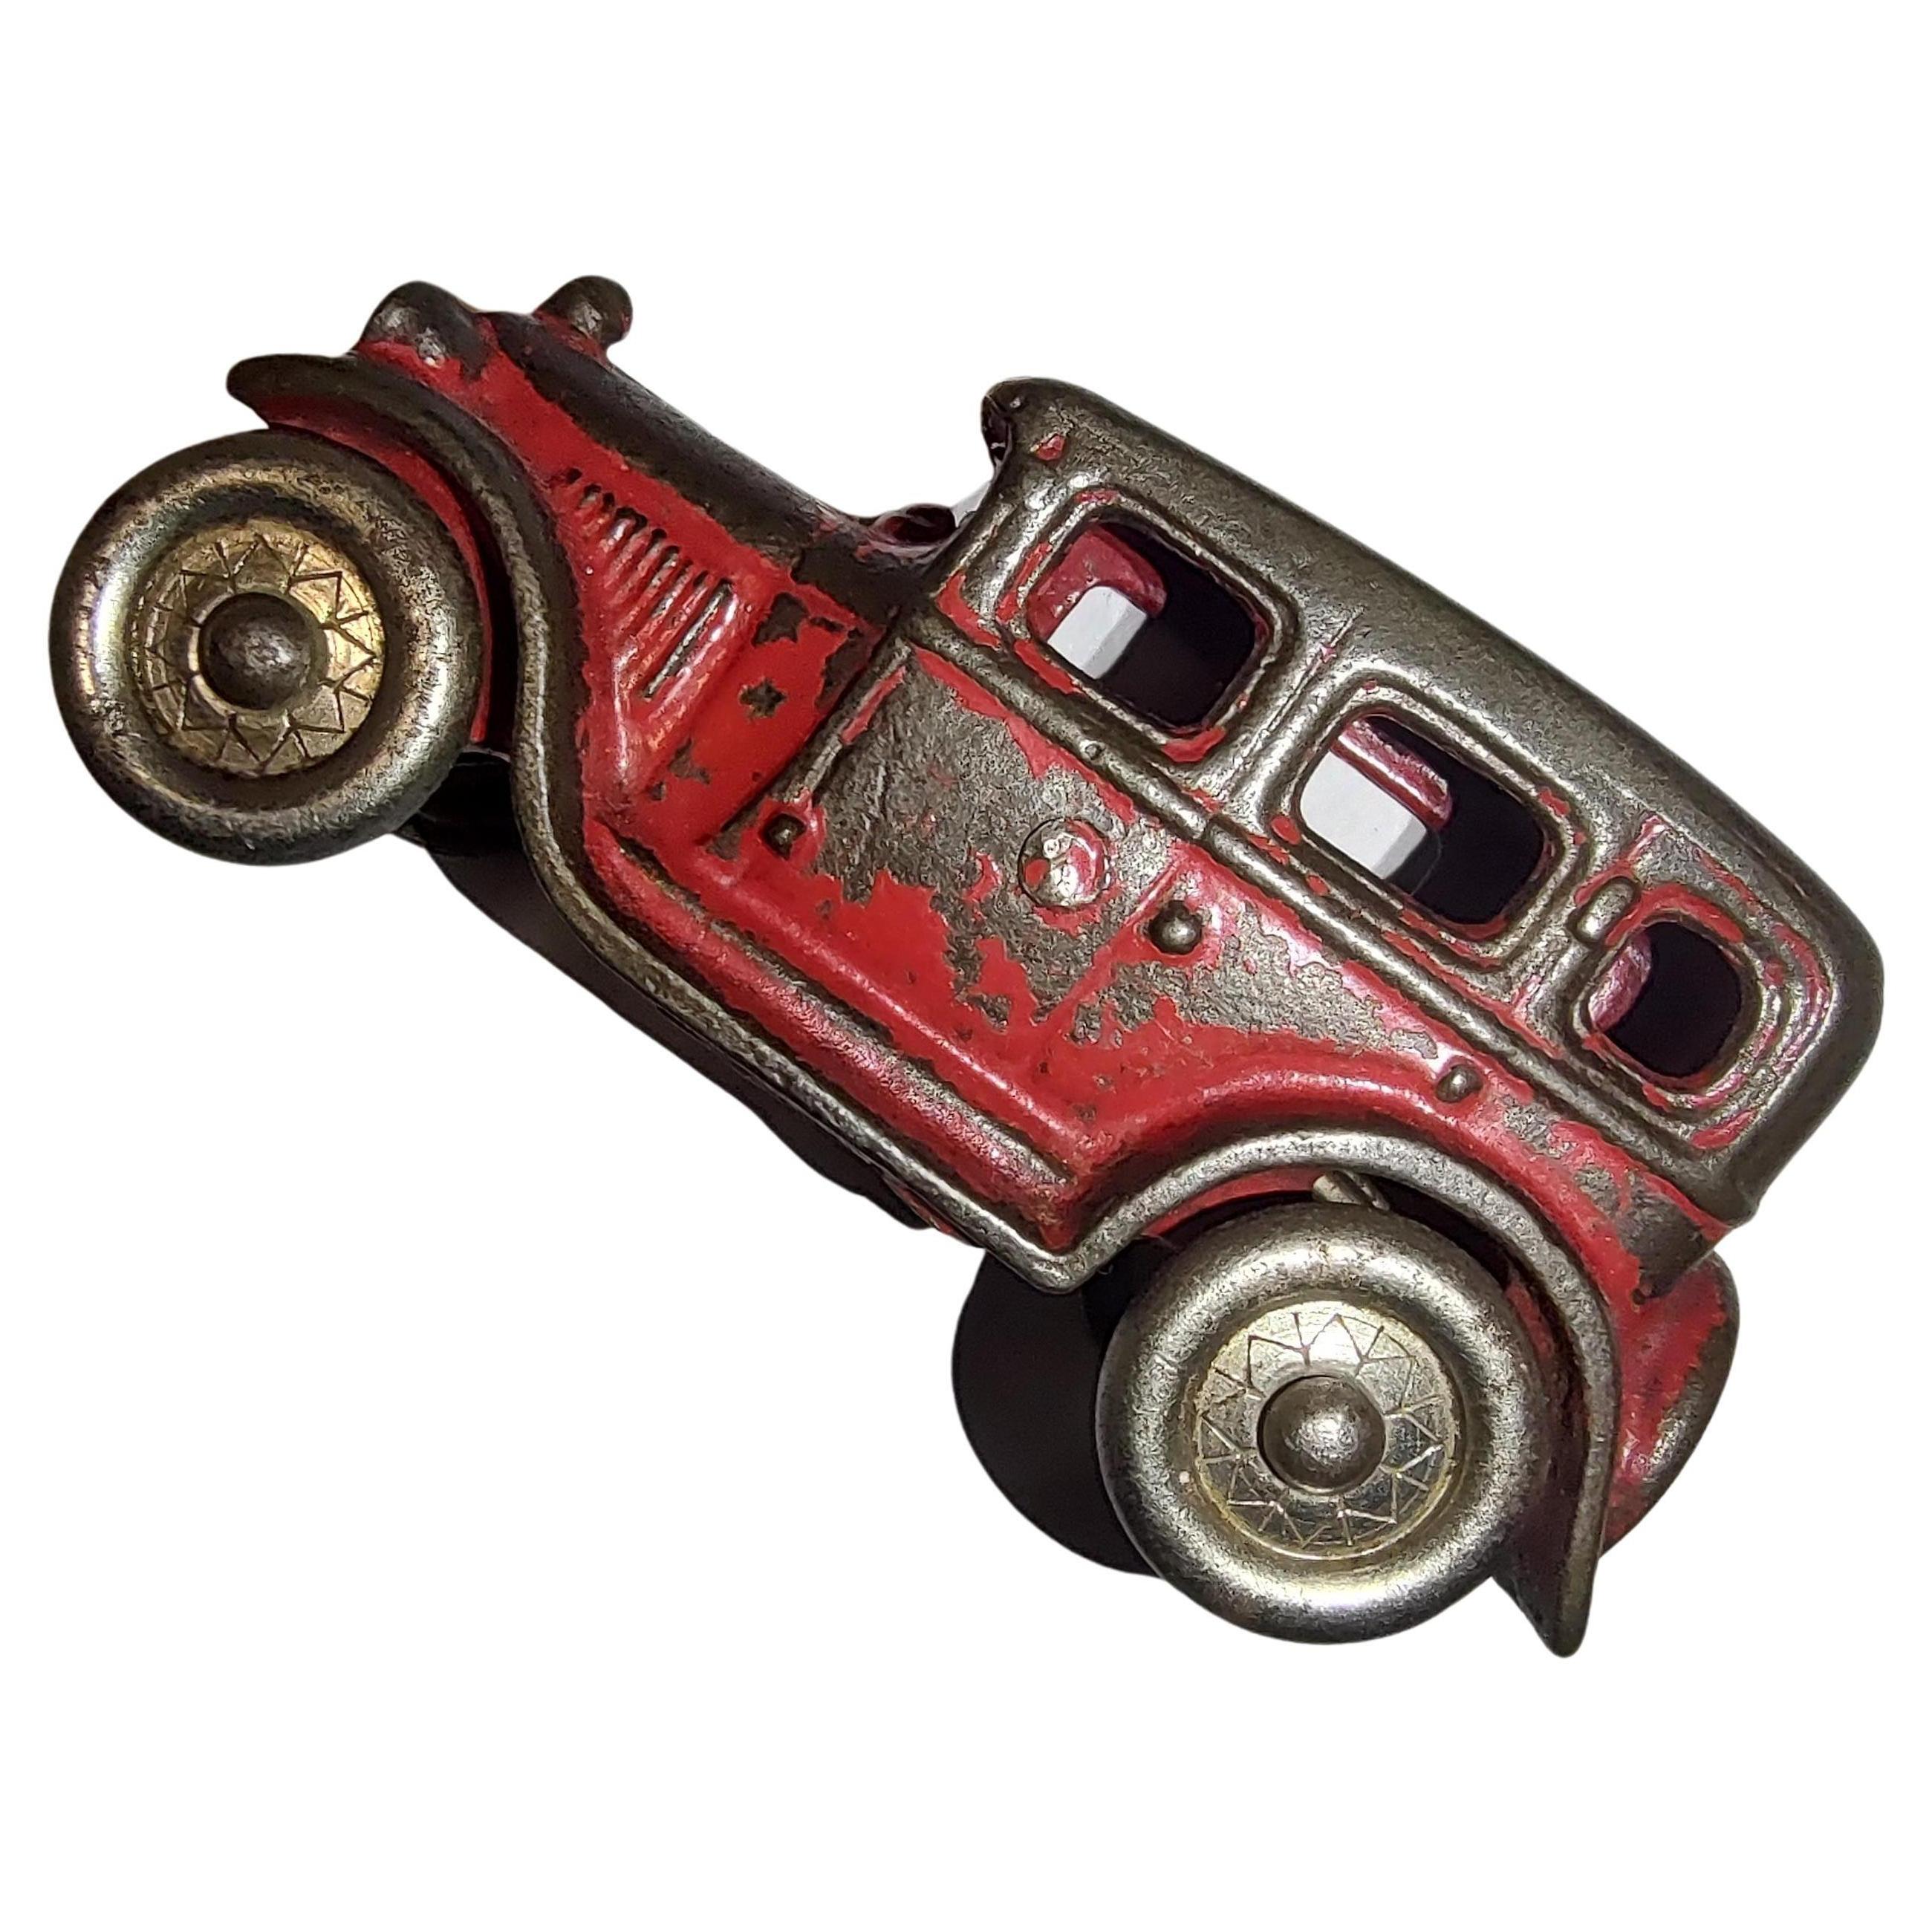 Fabulous and classic cast iron toy from the early thirties. In what looks like to the original Red with Nickel Wheels and the right amount of wear to the paint. Made by the A. C. Williams Company.